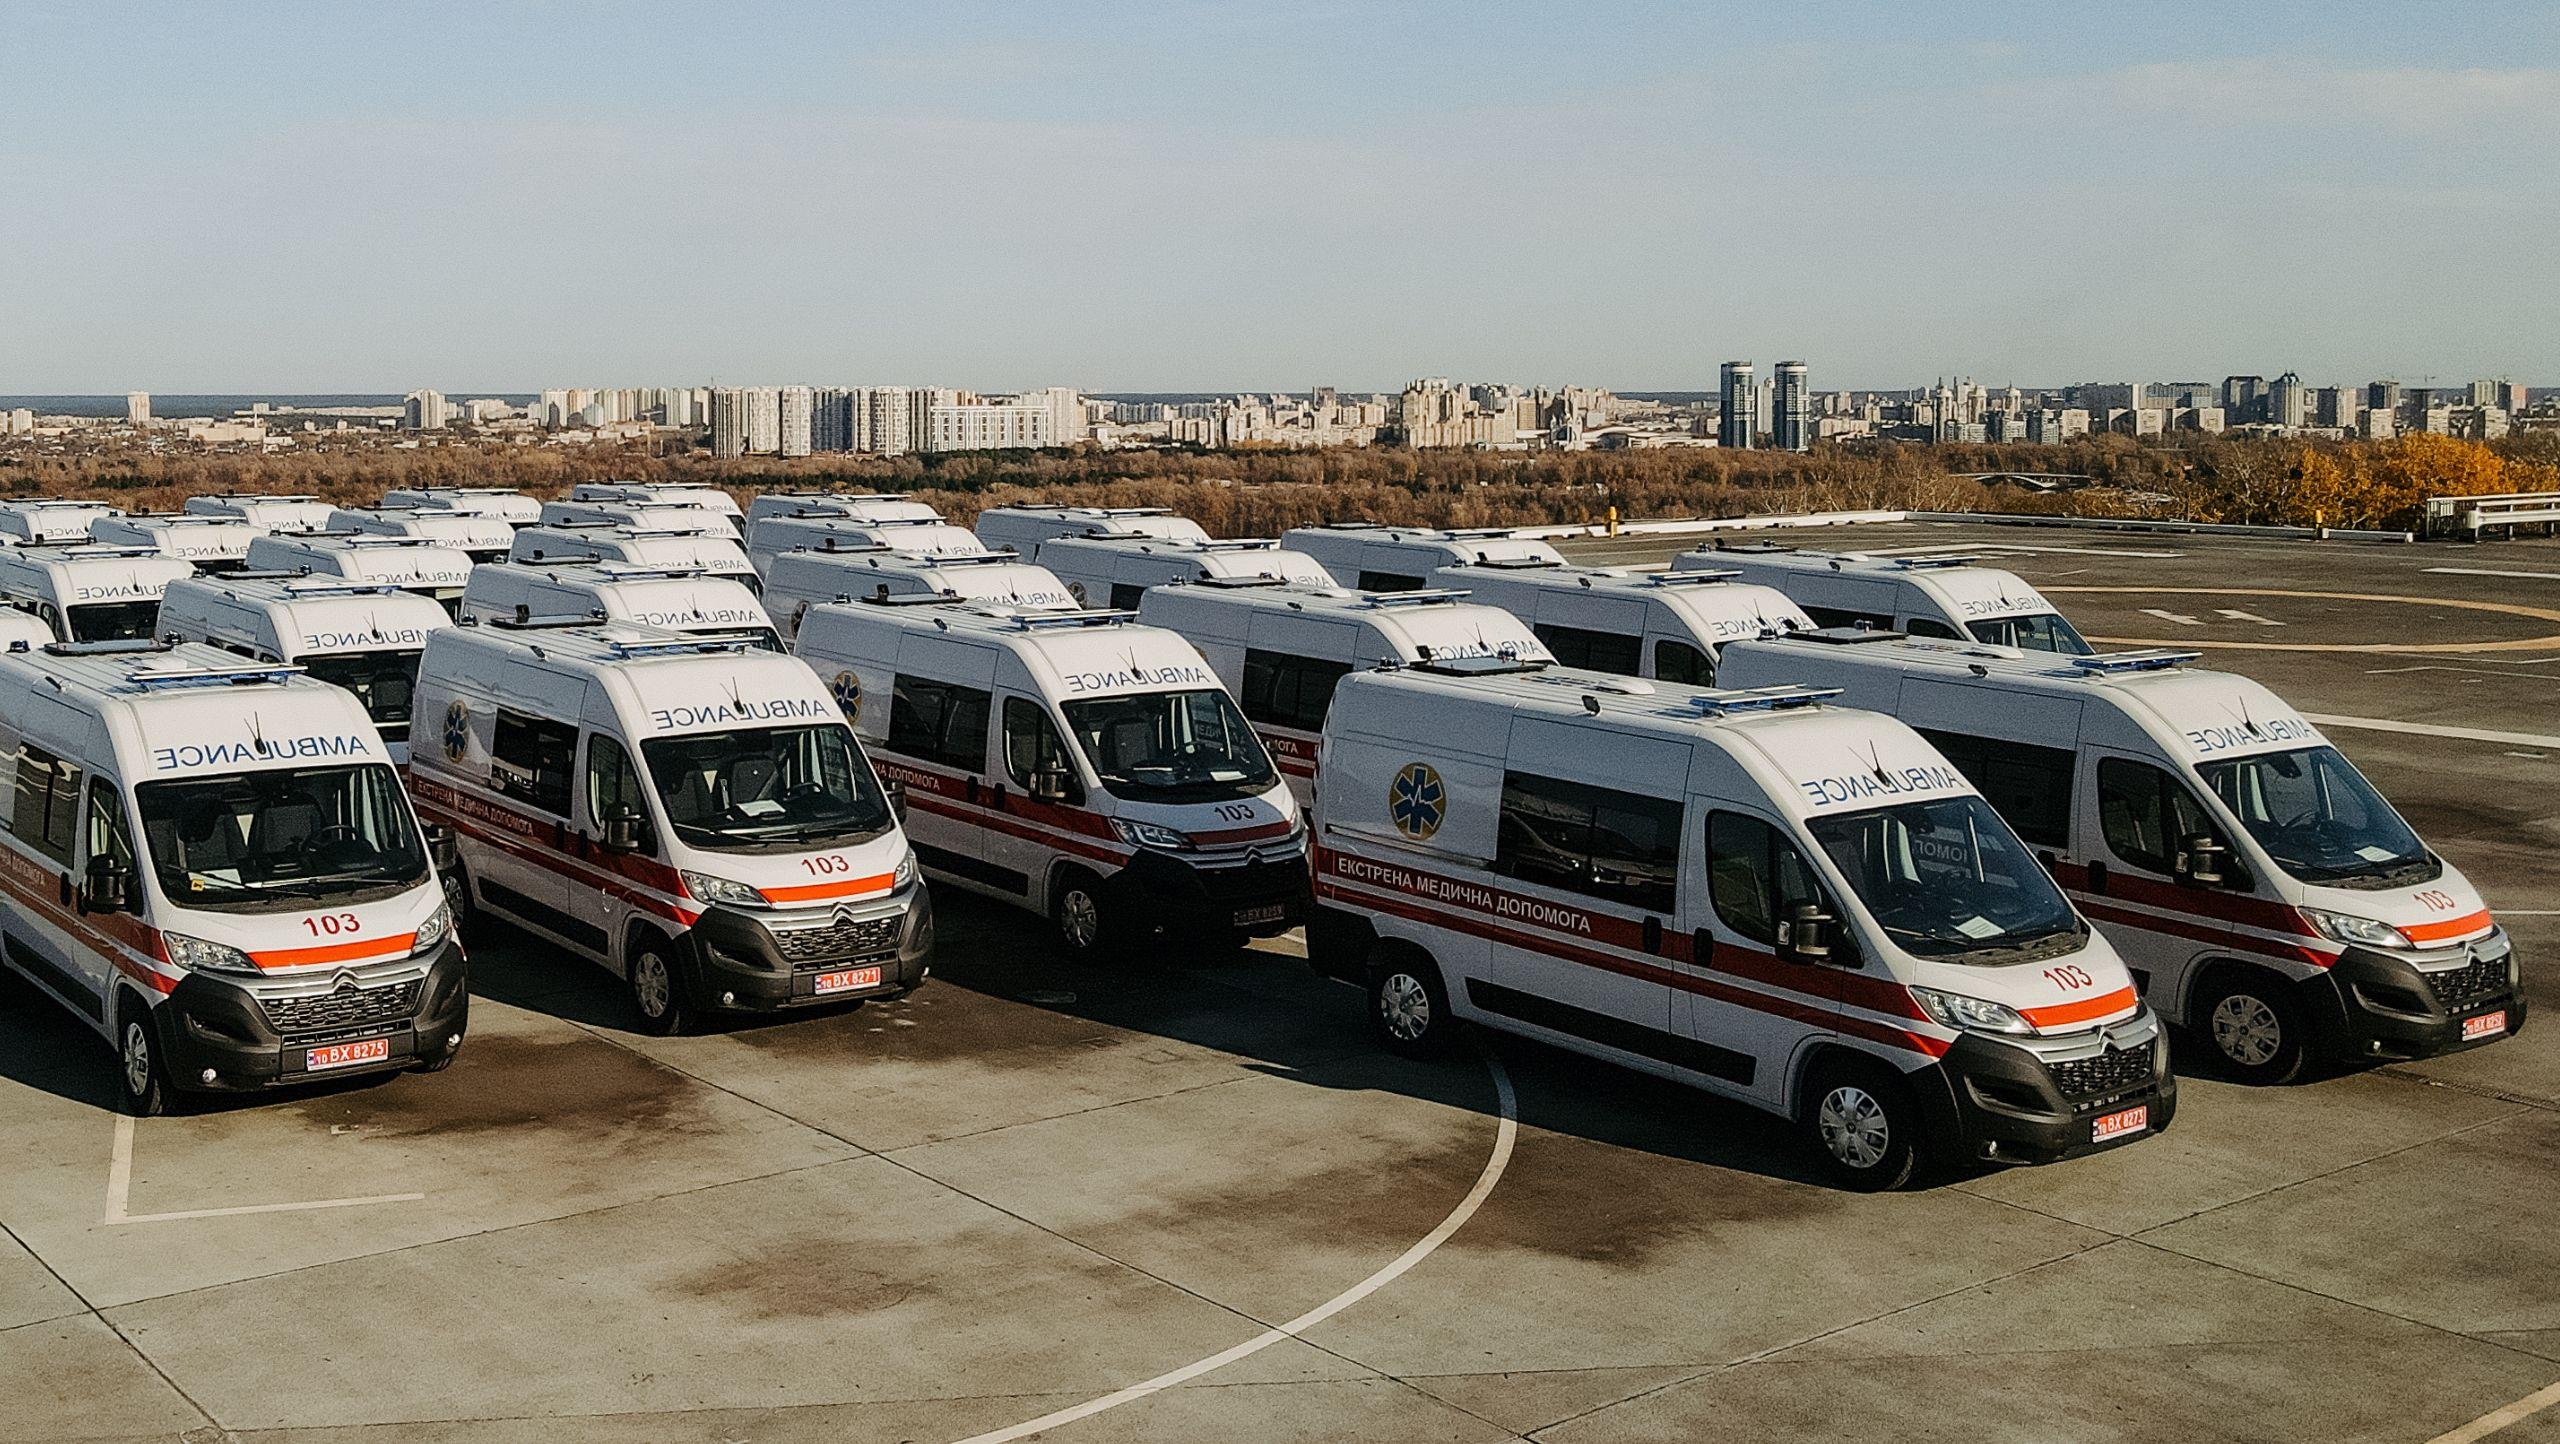 Another 43 Ambulances have been purchased with funds raised via UNITED24